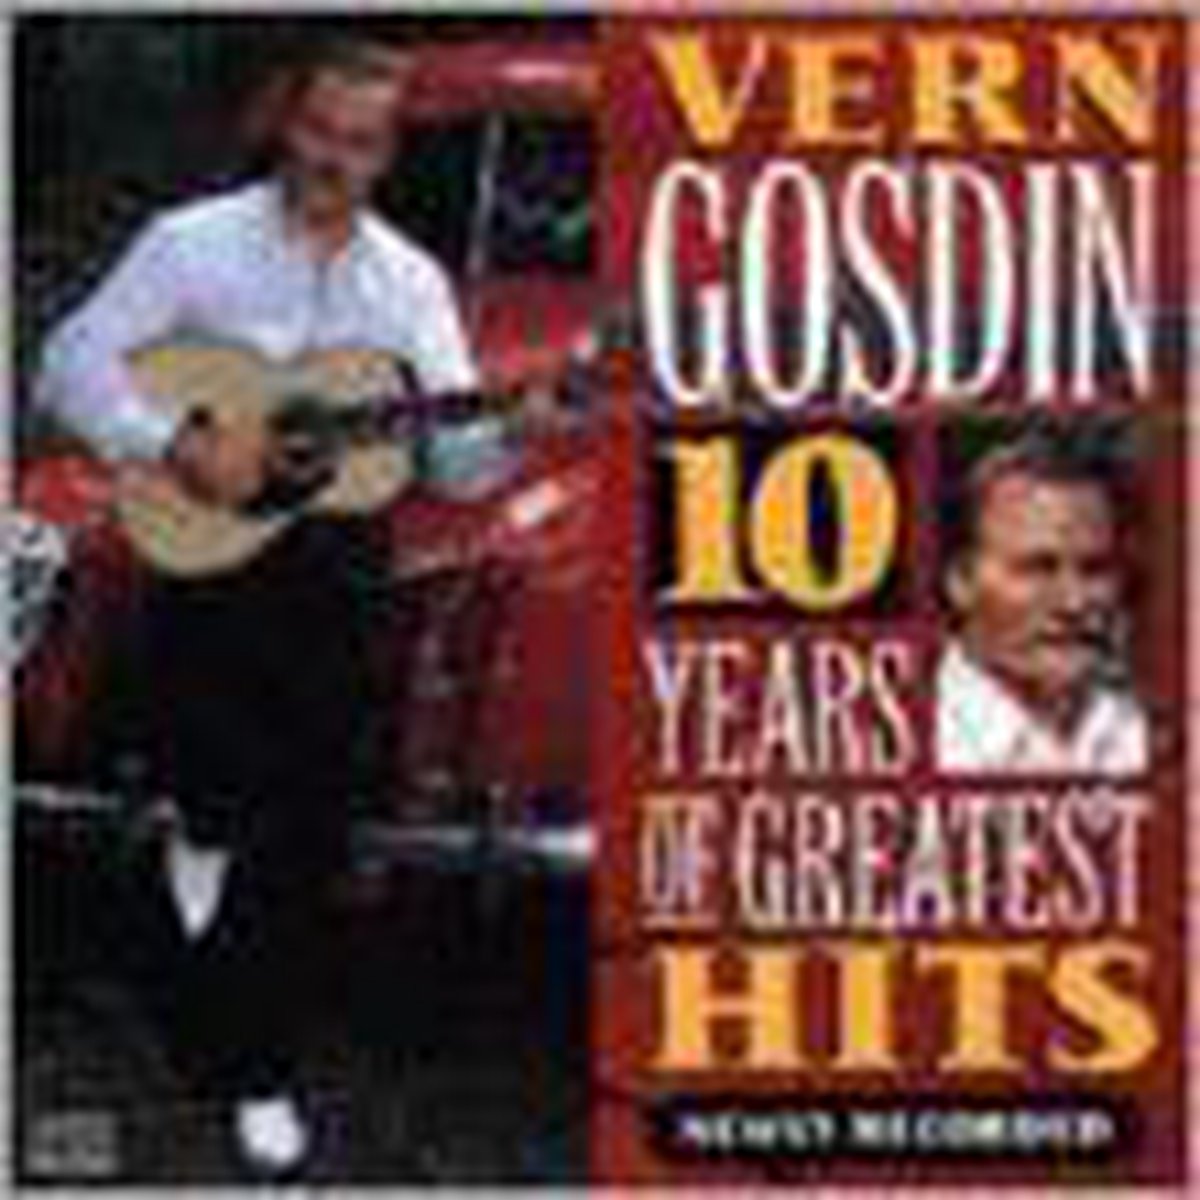 10 Years Of Greatest Hits: Newly Recorded - Vern Gosdin